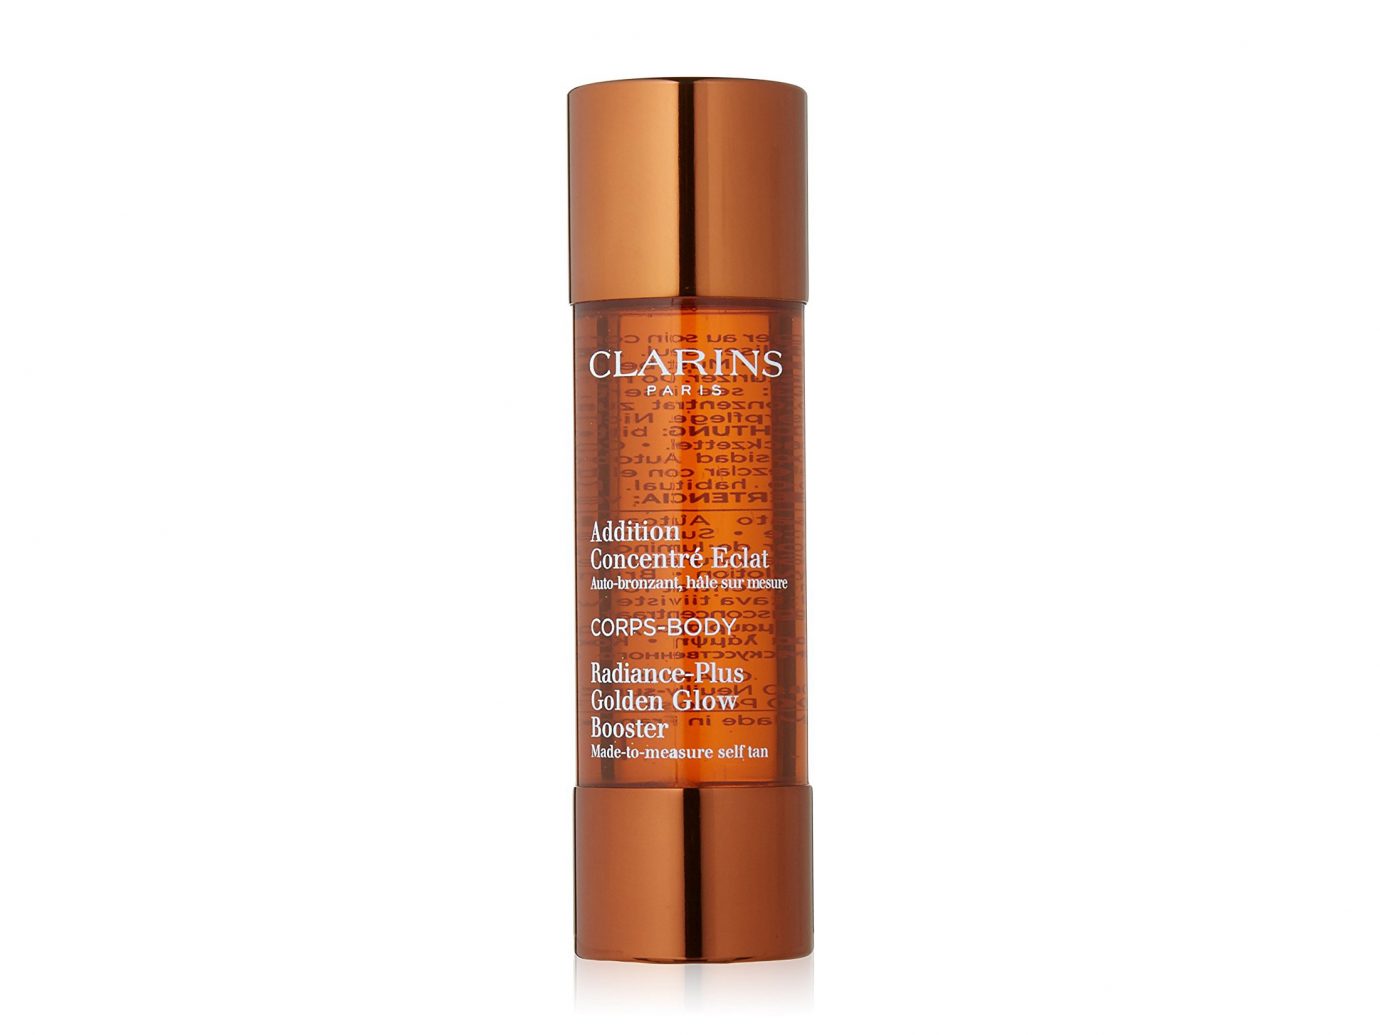 Summer Glow product Clarins Radiance-Plus Golden Glow Booster